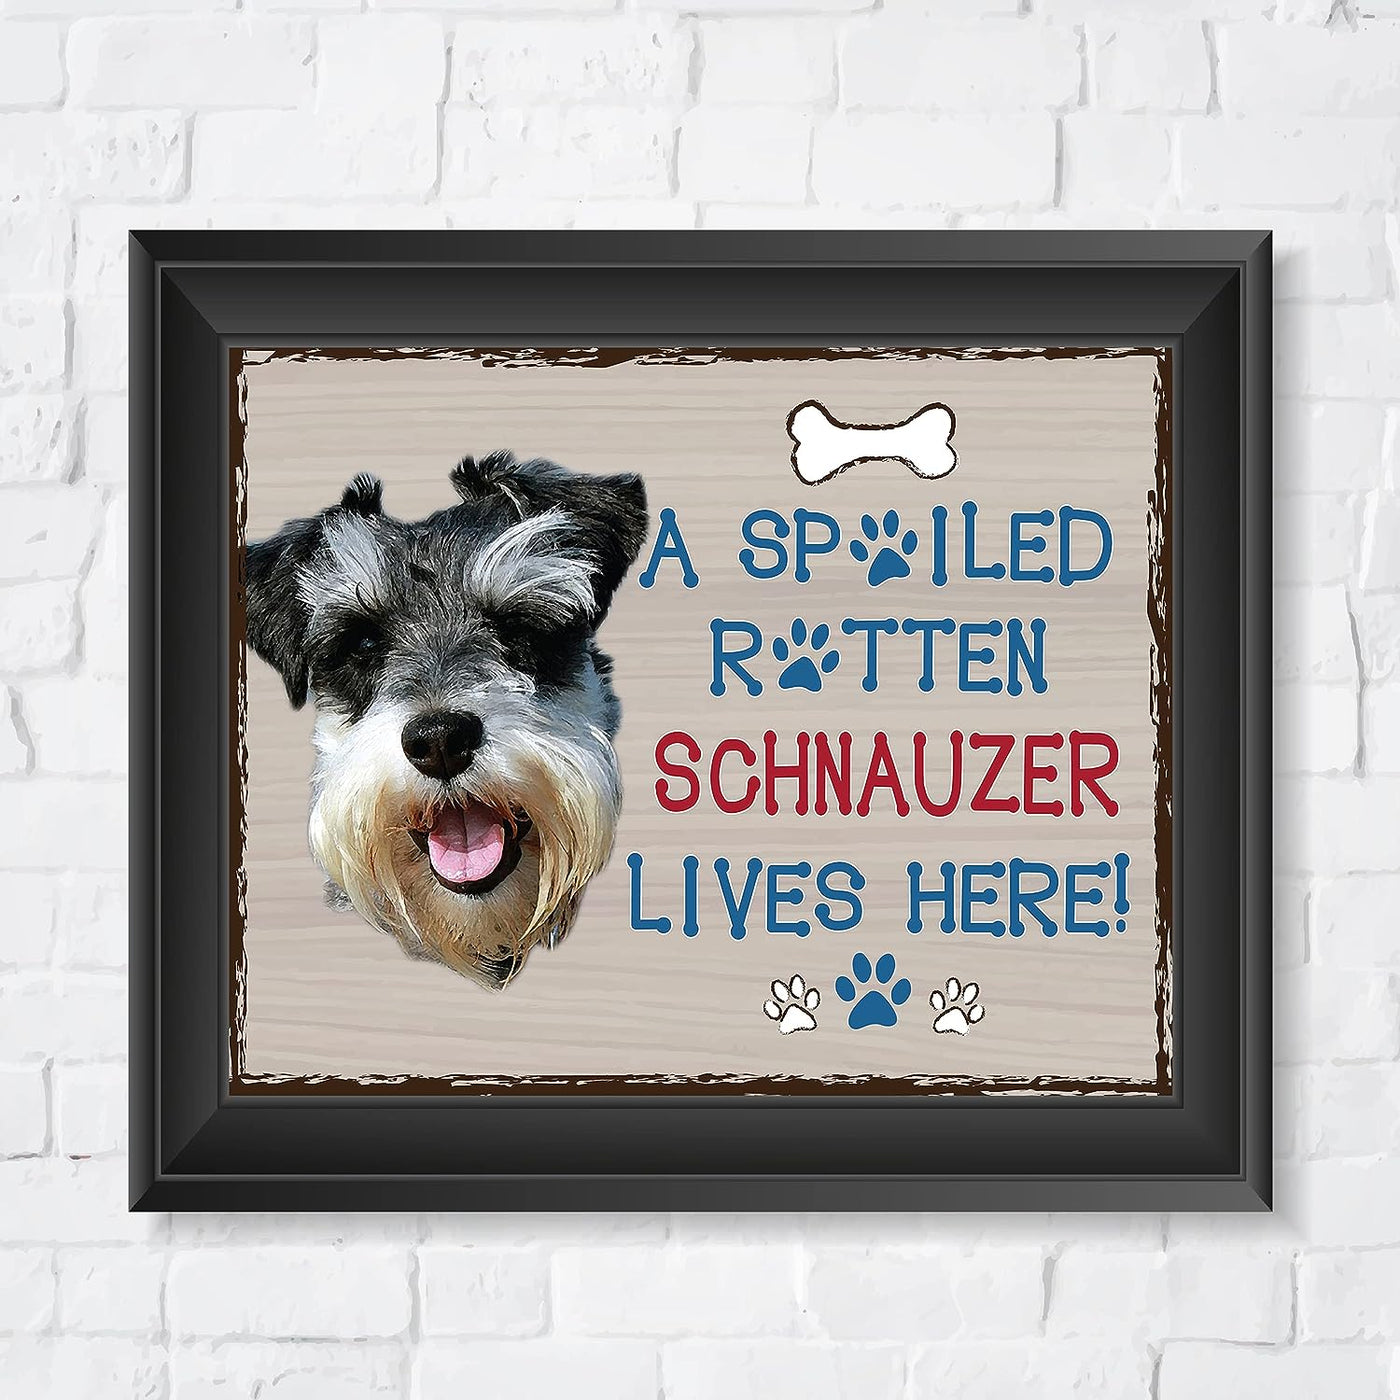 Schnauzer-Dog Poster Print-10 x 8" Wall Decor Sign-Ready To Frame."A Spoiled Rotten Schnauzer Lives Here". Perfect Pet Wall Art for Home-Kitchen-Cave-Bar-Garage. Great Gift for Schnauzer Lovers.